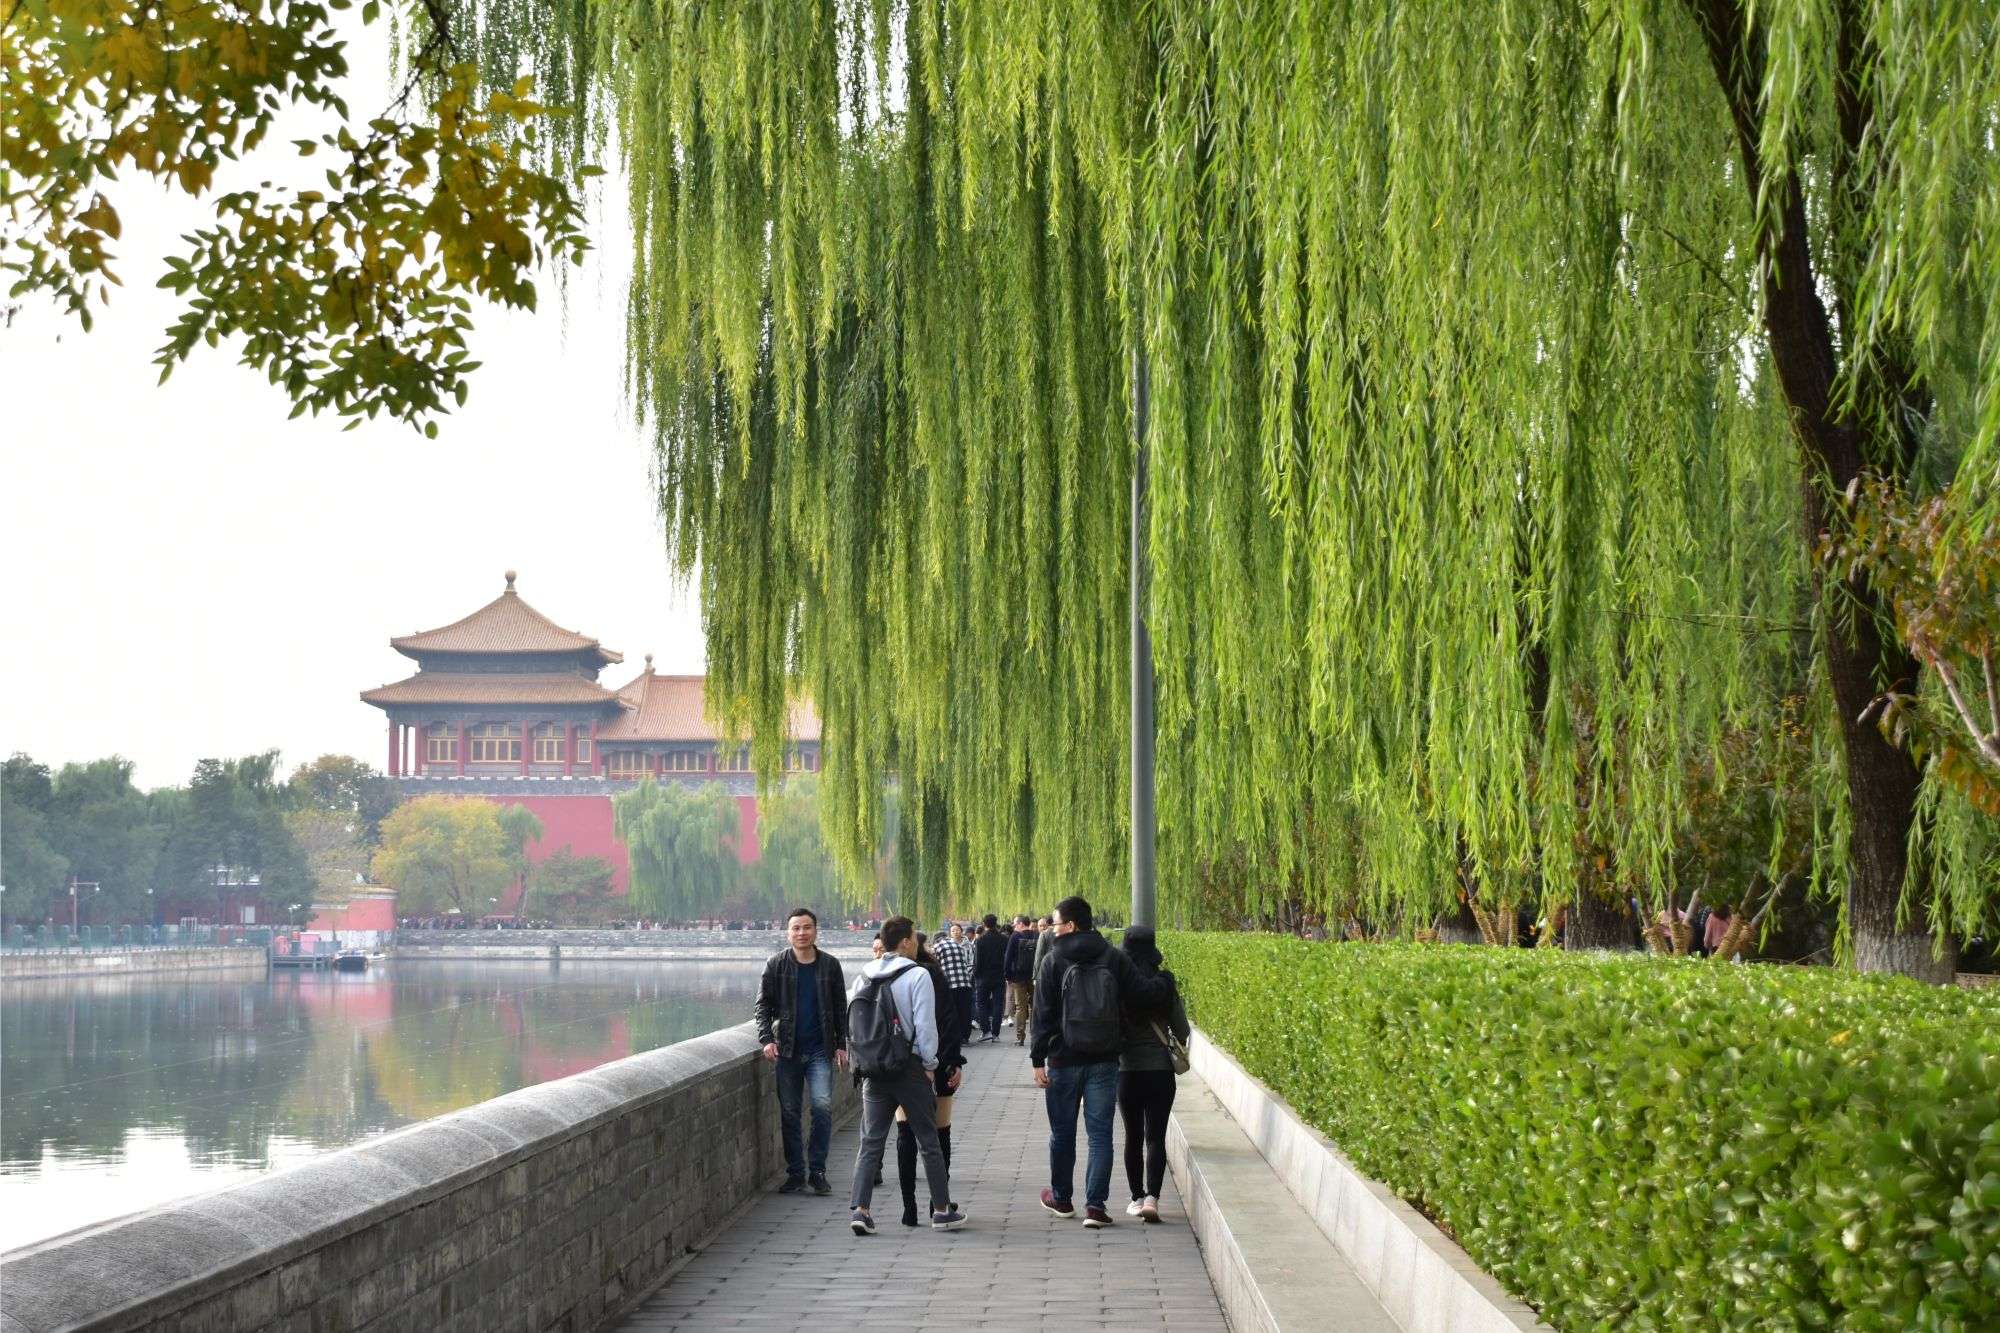 One day in Beijing – what to do and where to go